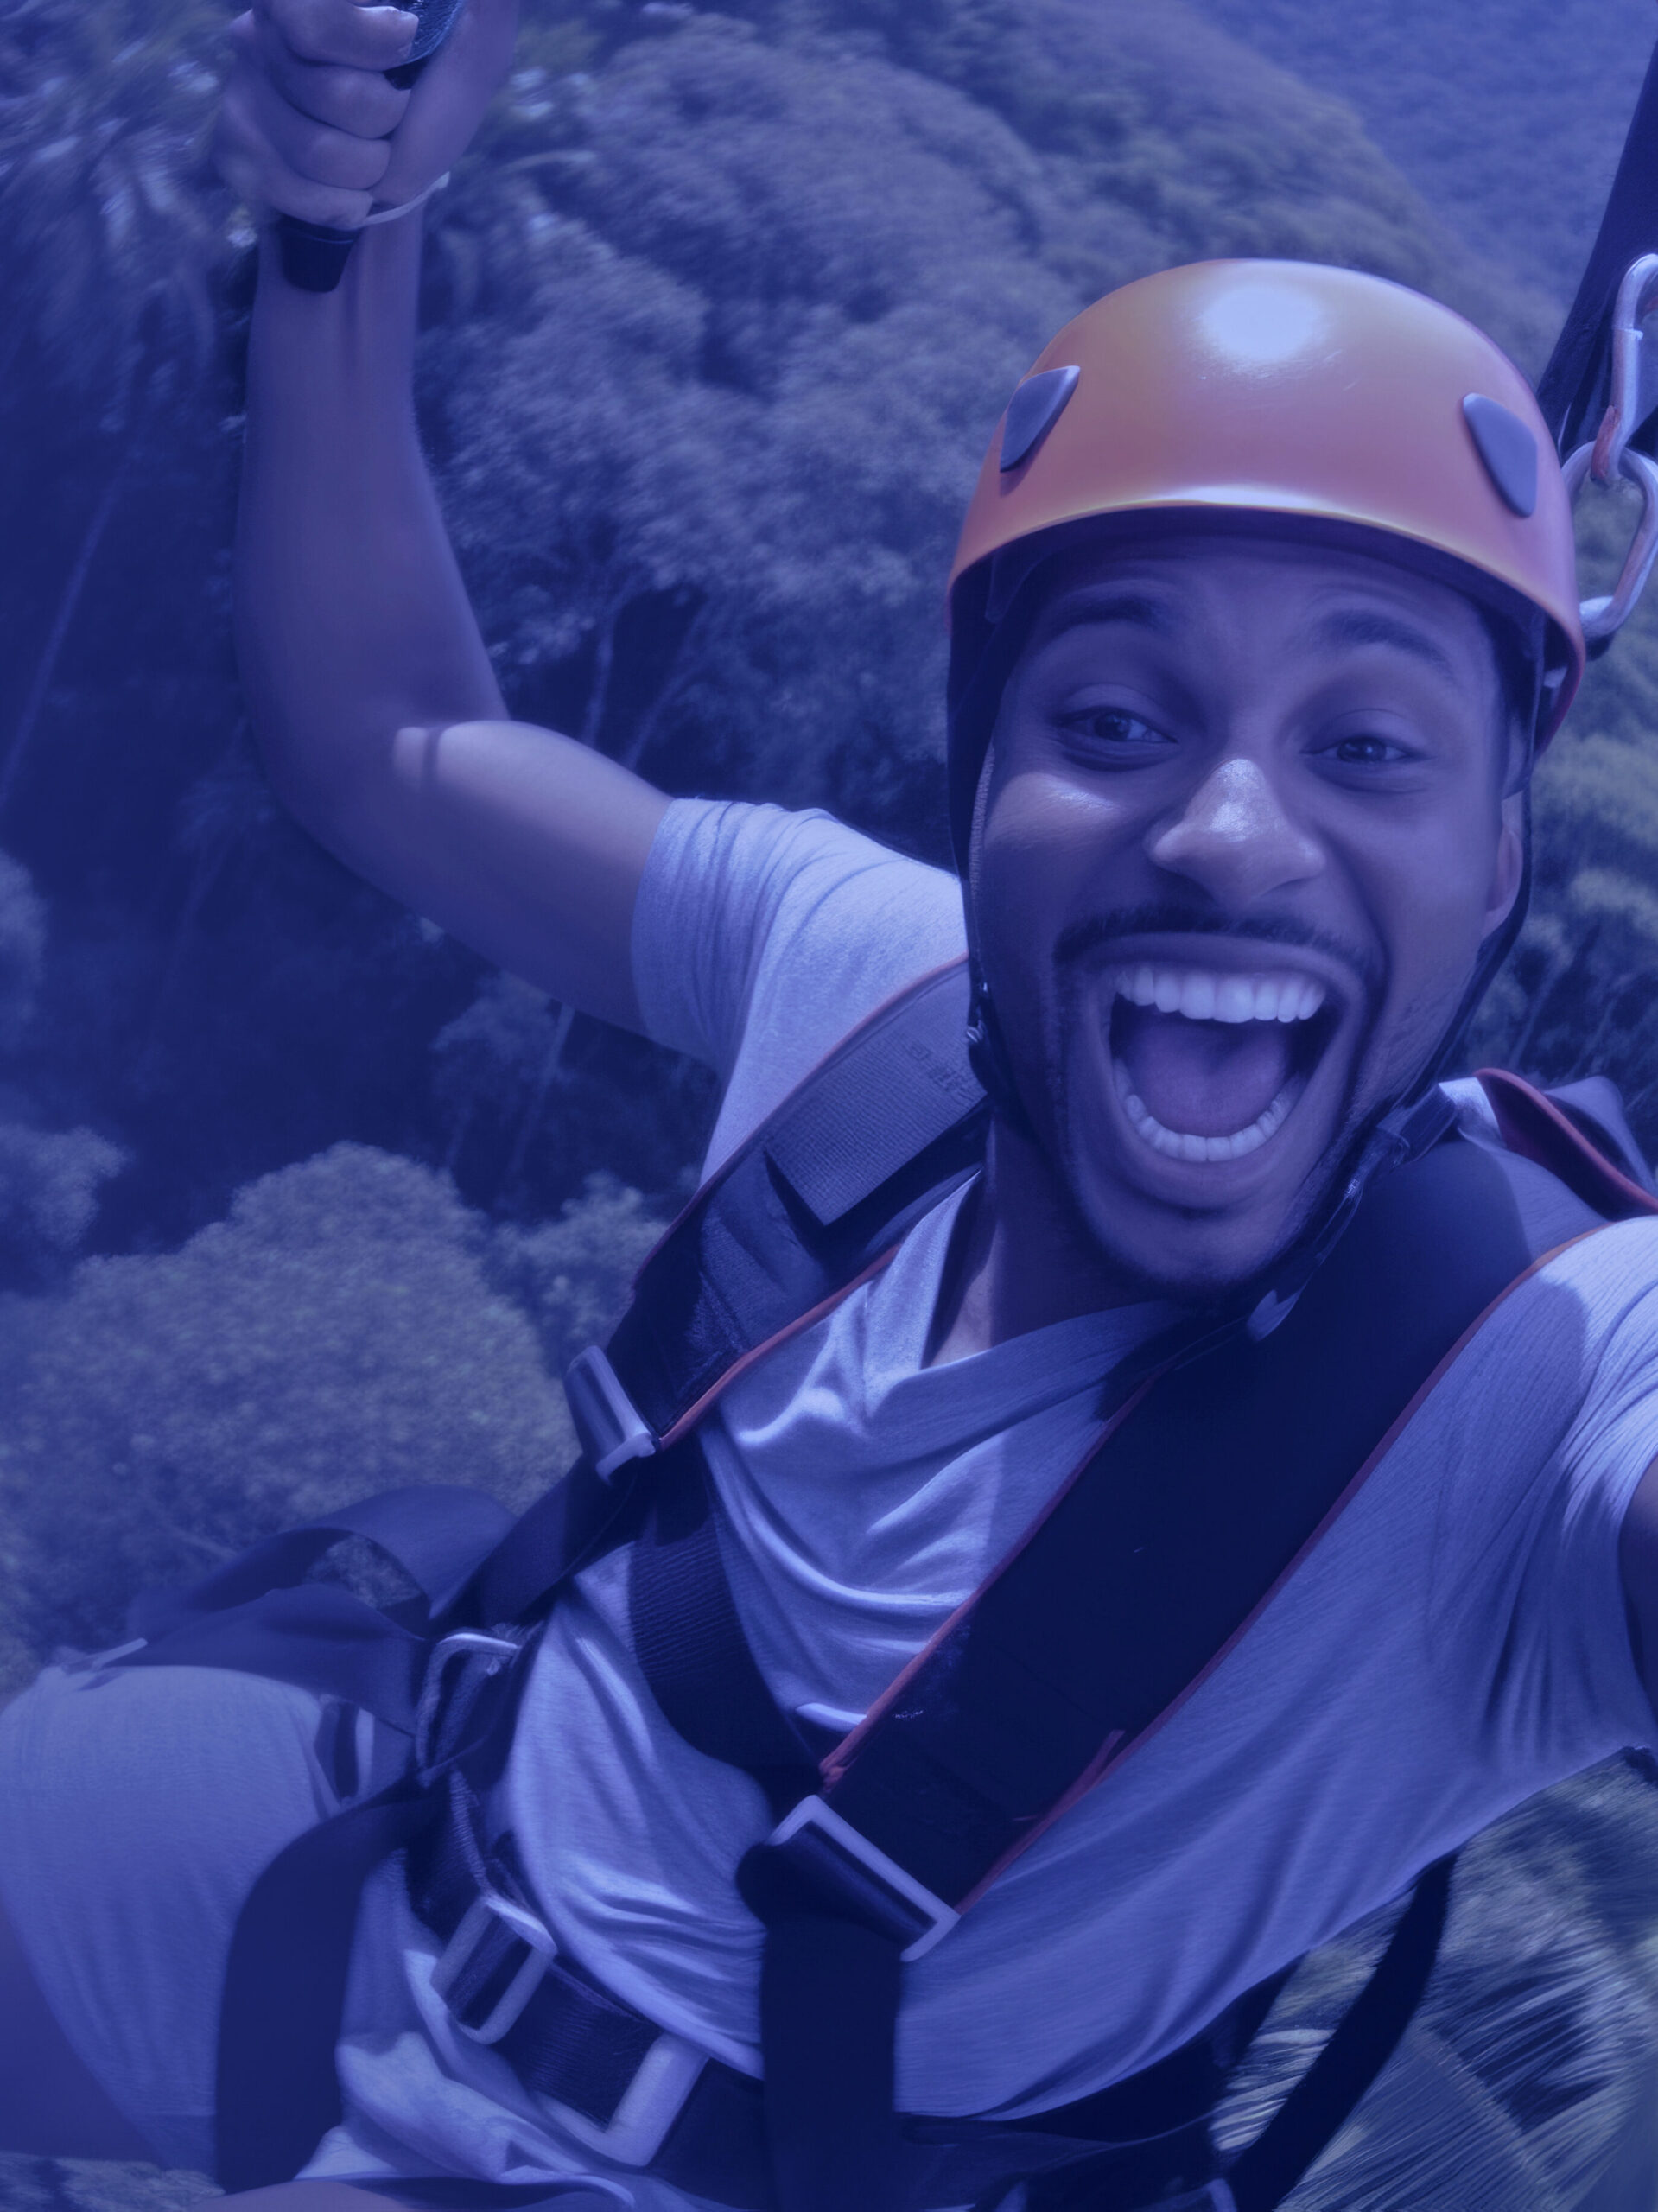 Young man engaged in a thrilling ziplining adventure through a dense rainforest canopy. He soars above the treetops, he laughter and excitement echoing through the jungle.